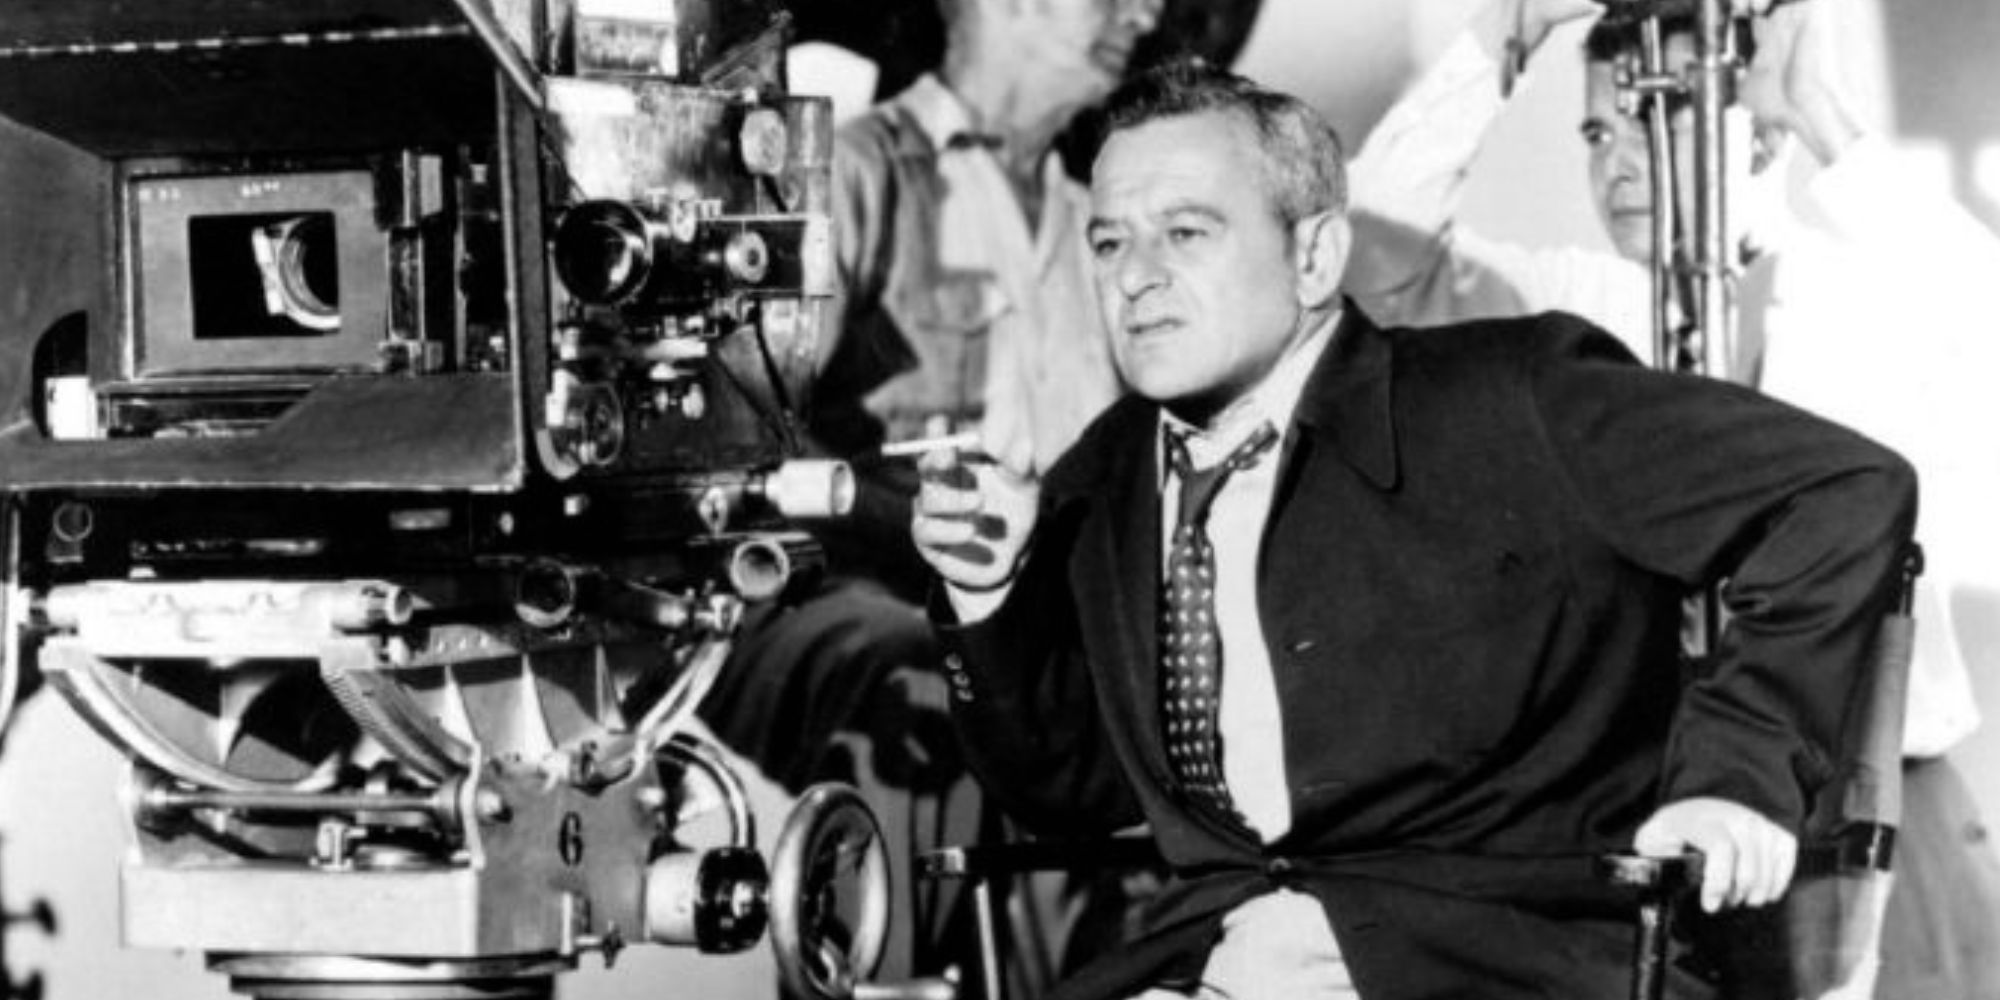 William Wyler sitting next to a camera on set looking forward via Directed by William Wyler documentary (1986)